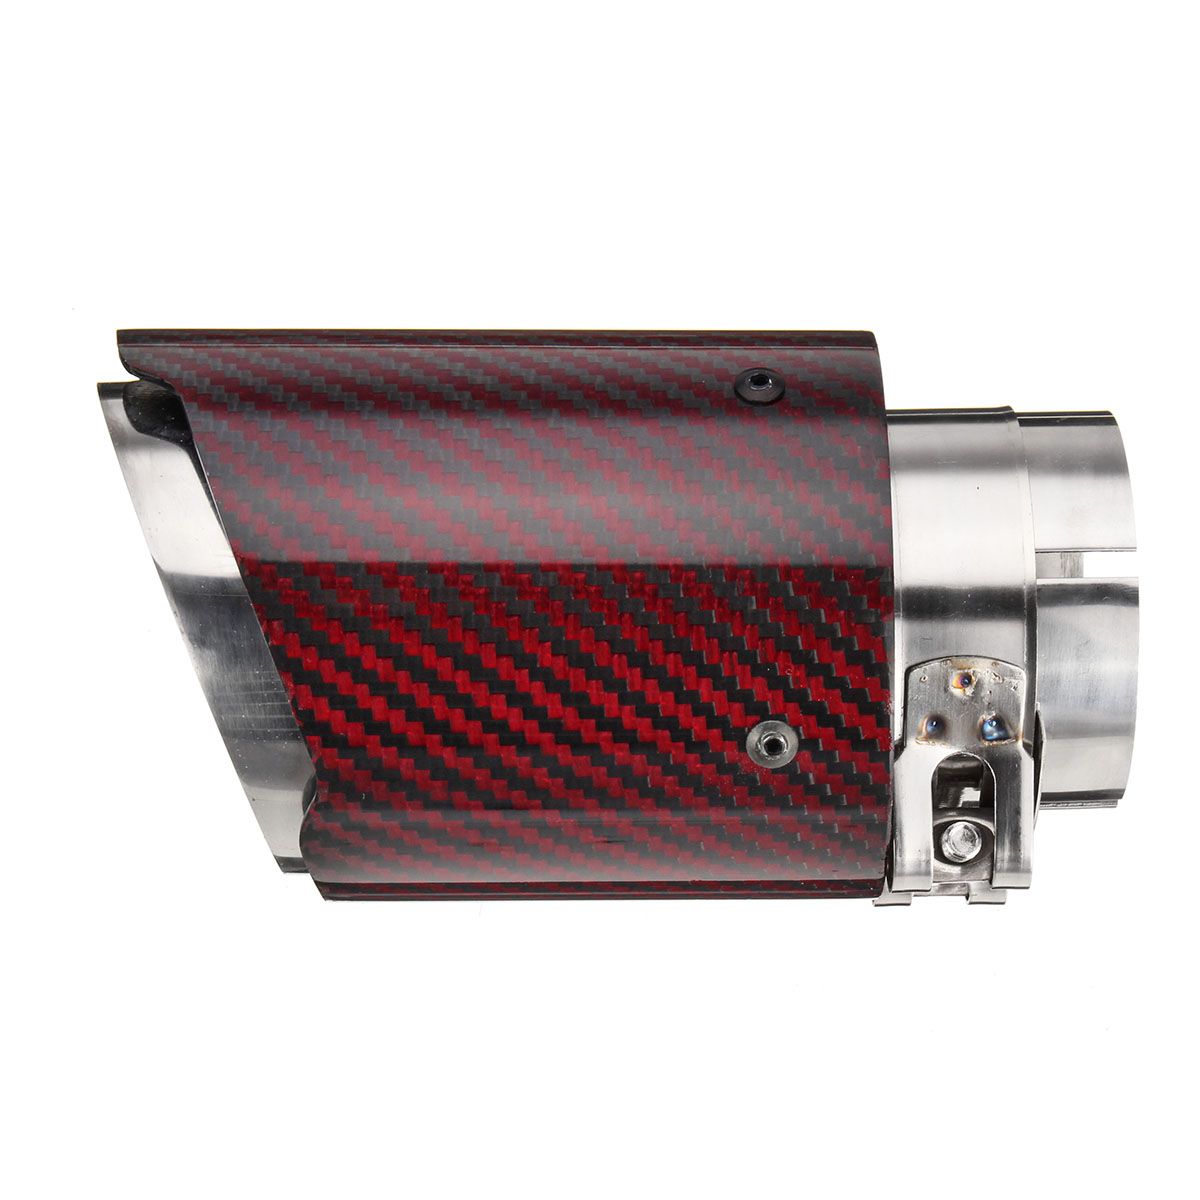 25-Inch-63-89mm-Universal-Auto-Car-SUV-Carbon-Fiber-Exhaust-Muffler-Pipe-Tail-End-Tip-1428060